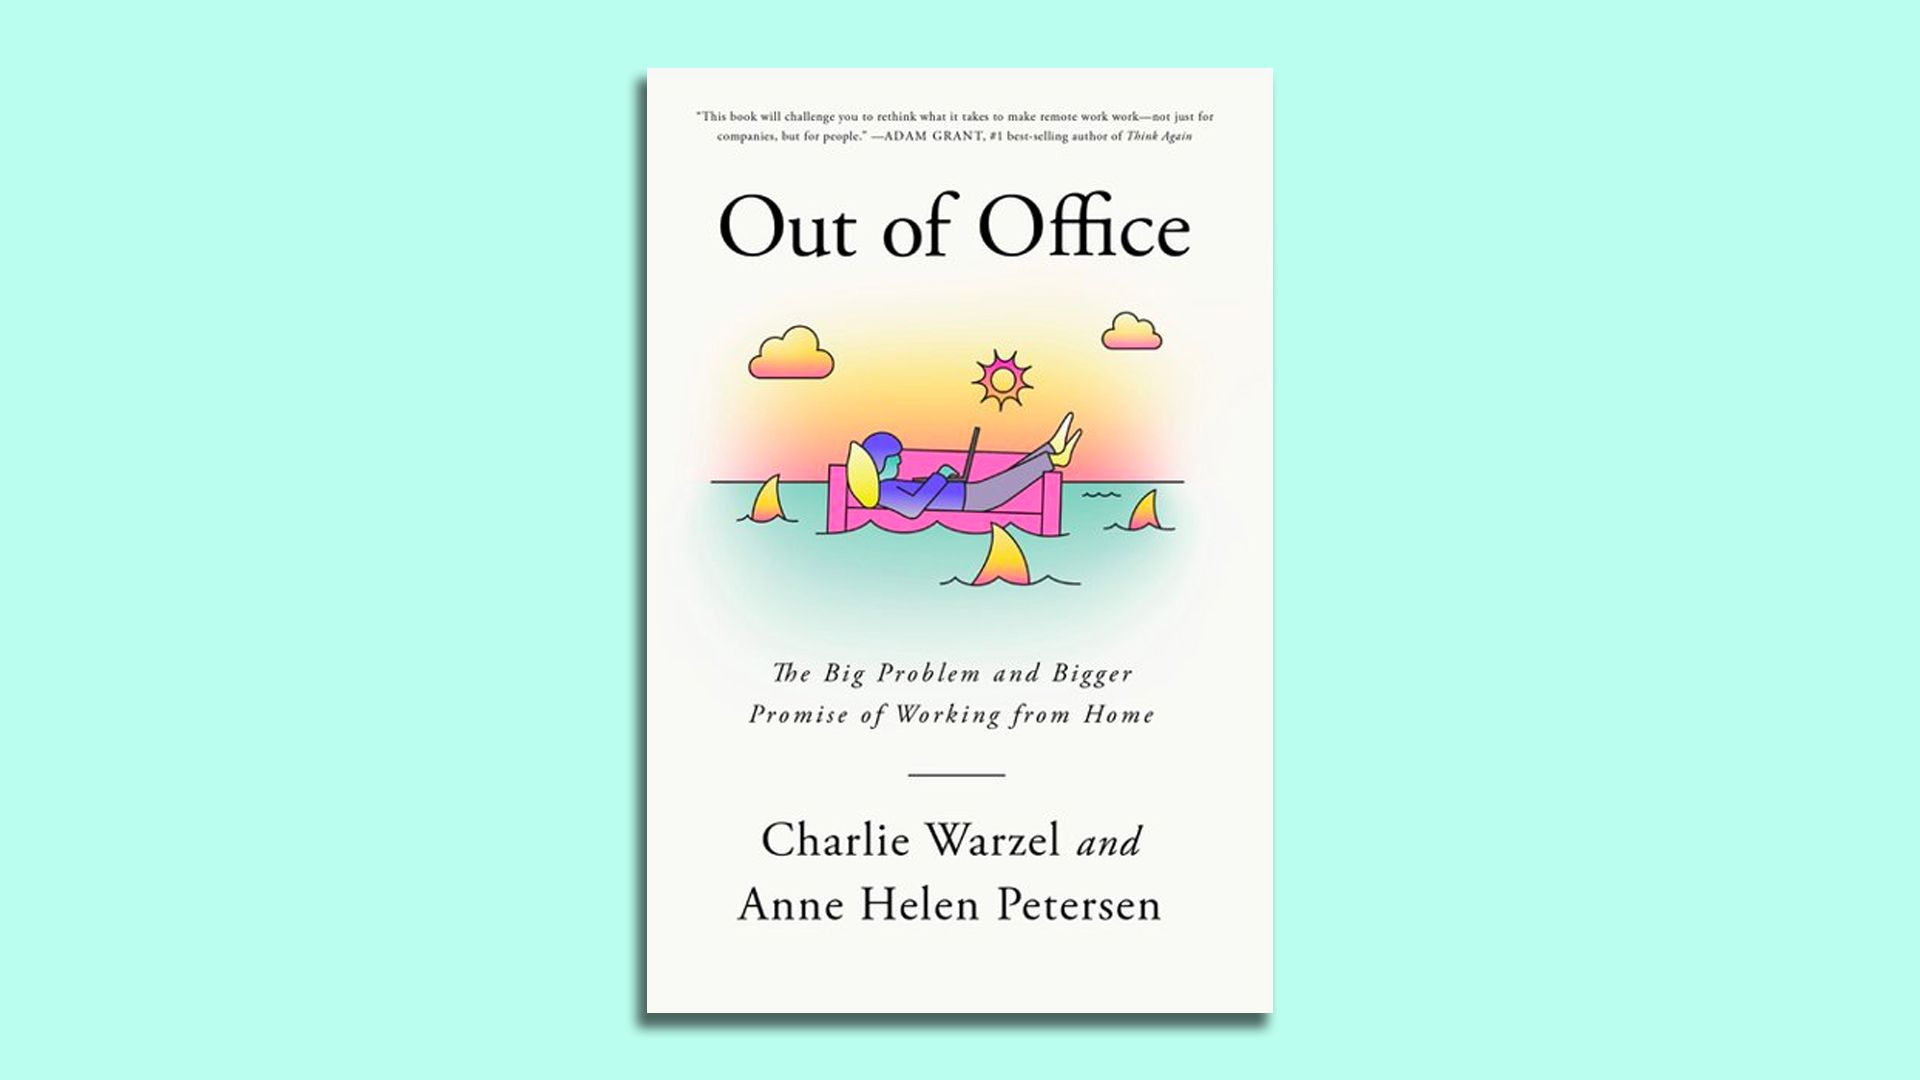 Out of Office book